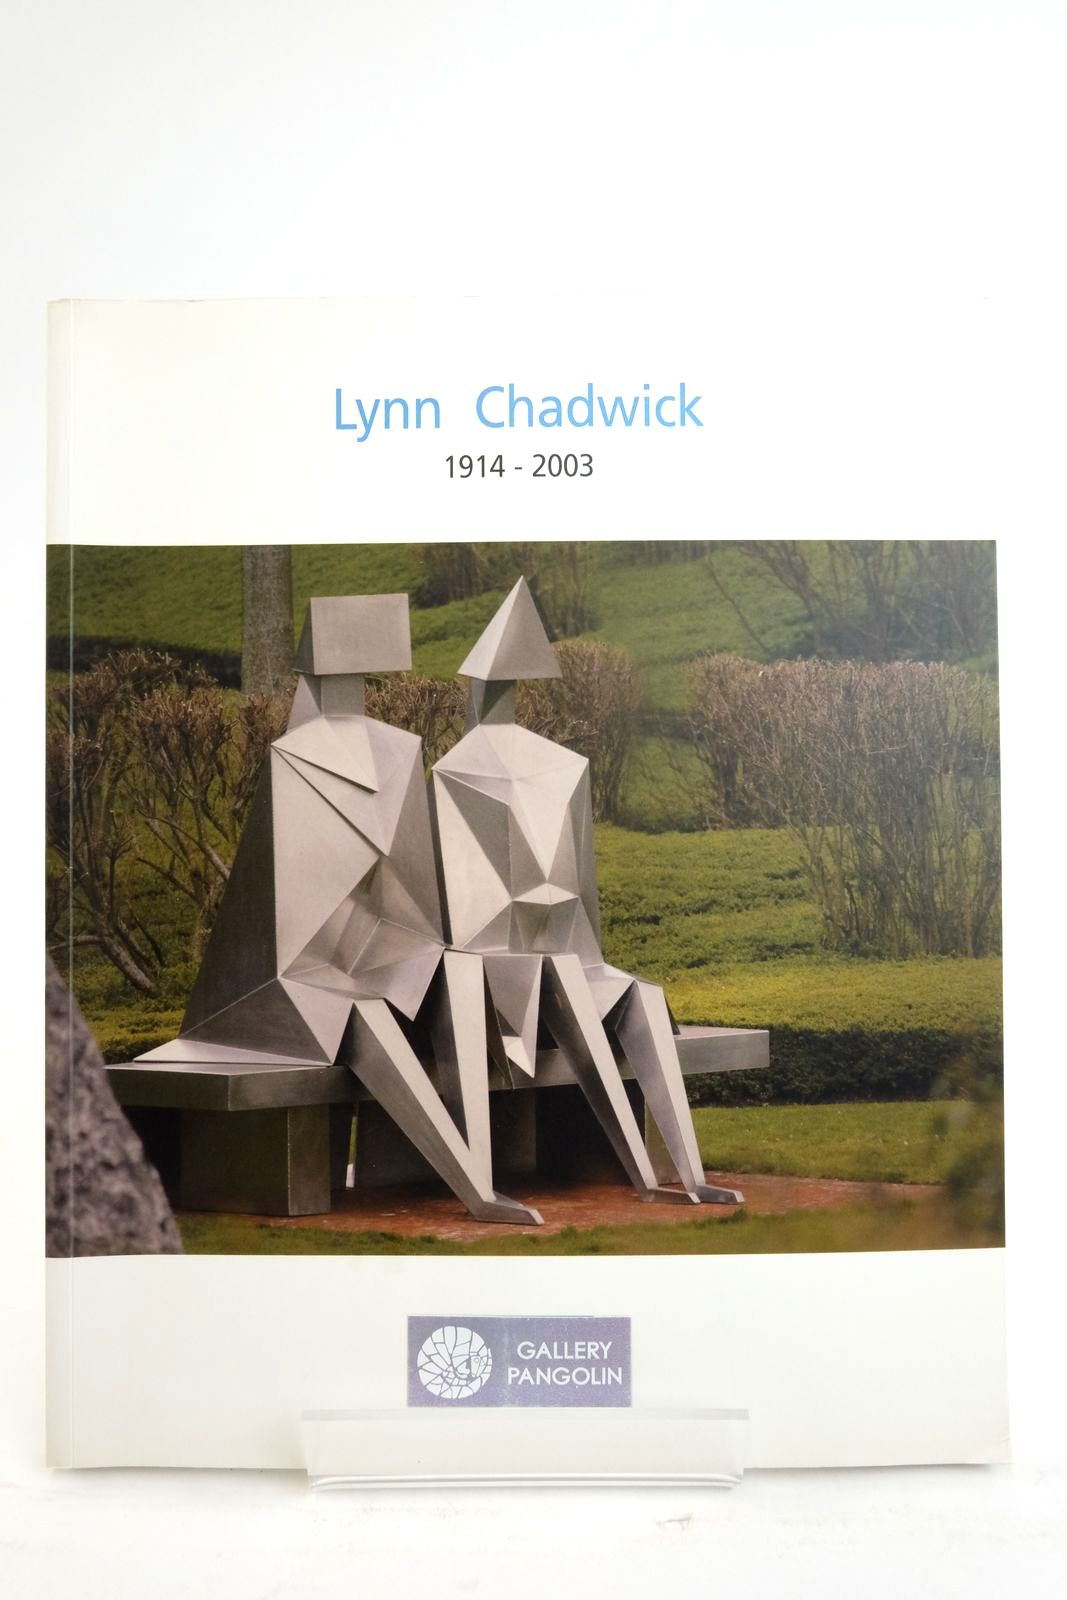 Photo of LYNN CHADWICK written by Packer, William illustrated by Chadwick, Lynn published by Gallery Pangolin (STOCK CODE: 2136488)  for sale by Stella & Rose's Books